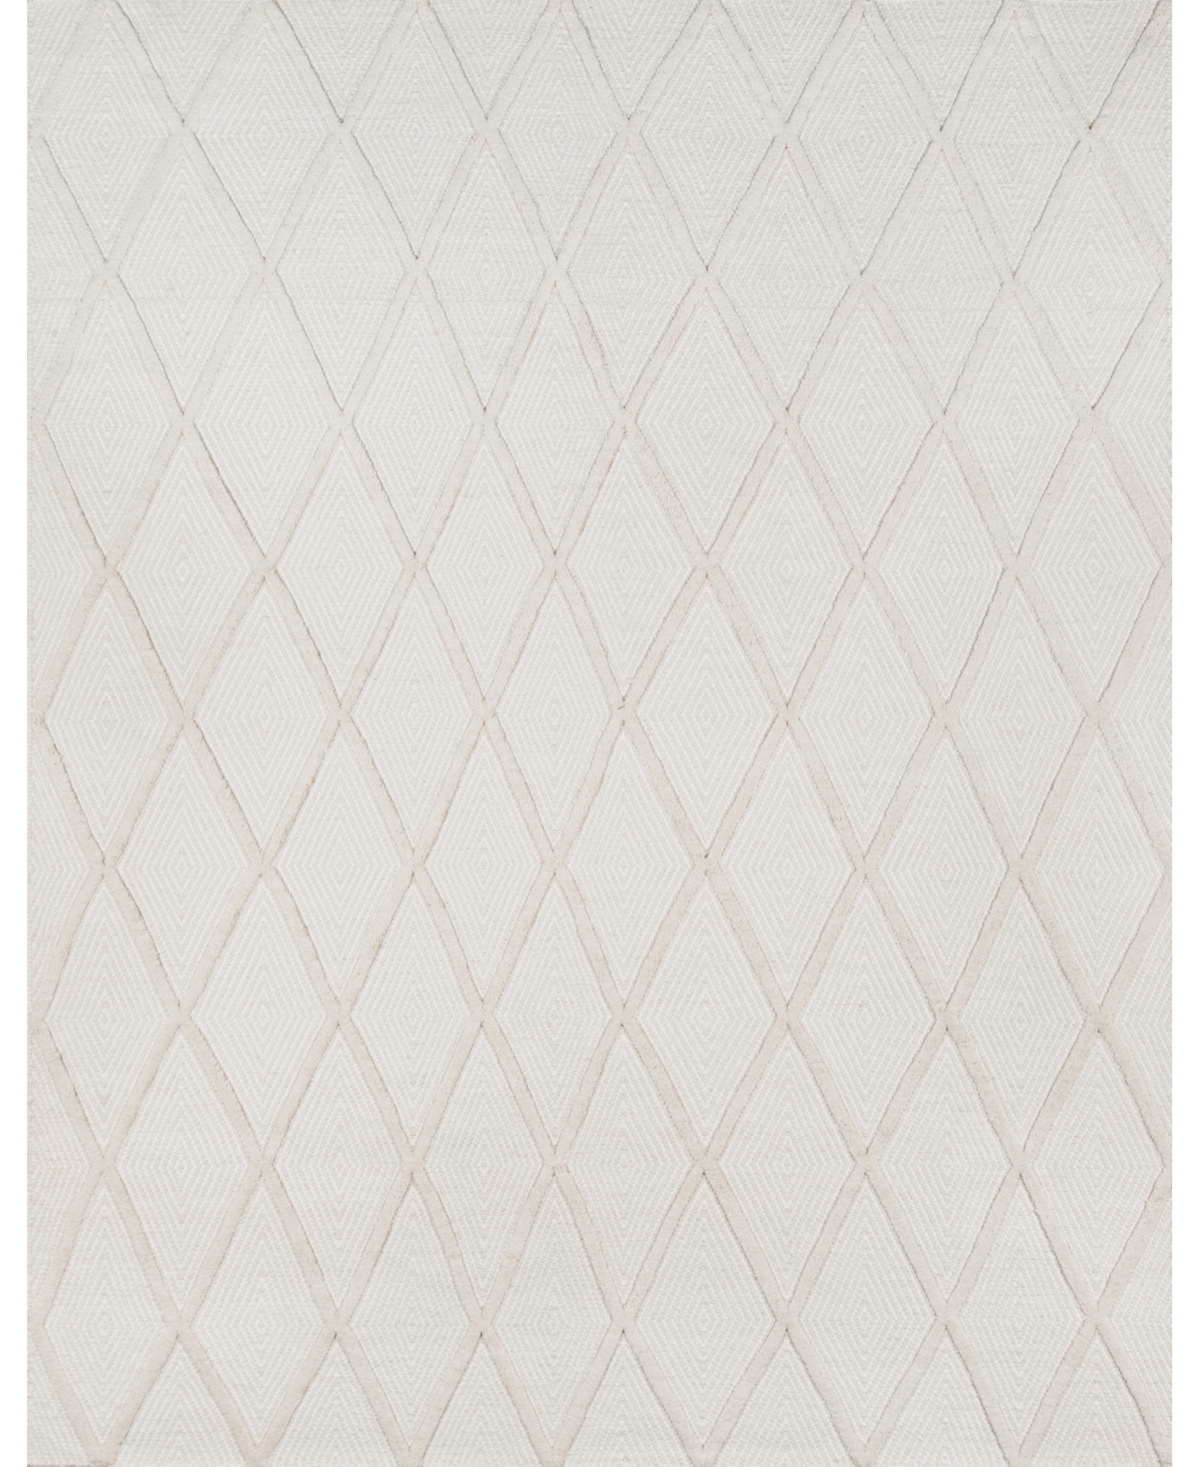 Erin Gates Langdon Lgd-3 Spring Charcoal 3'9" X 5'9" Area Rug In Beige